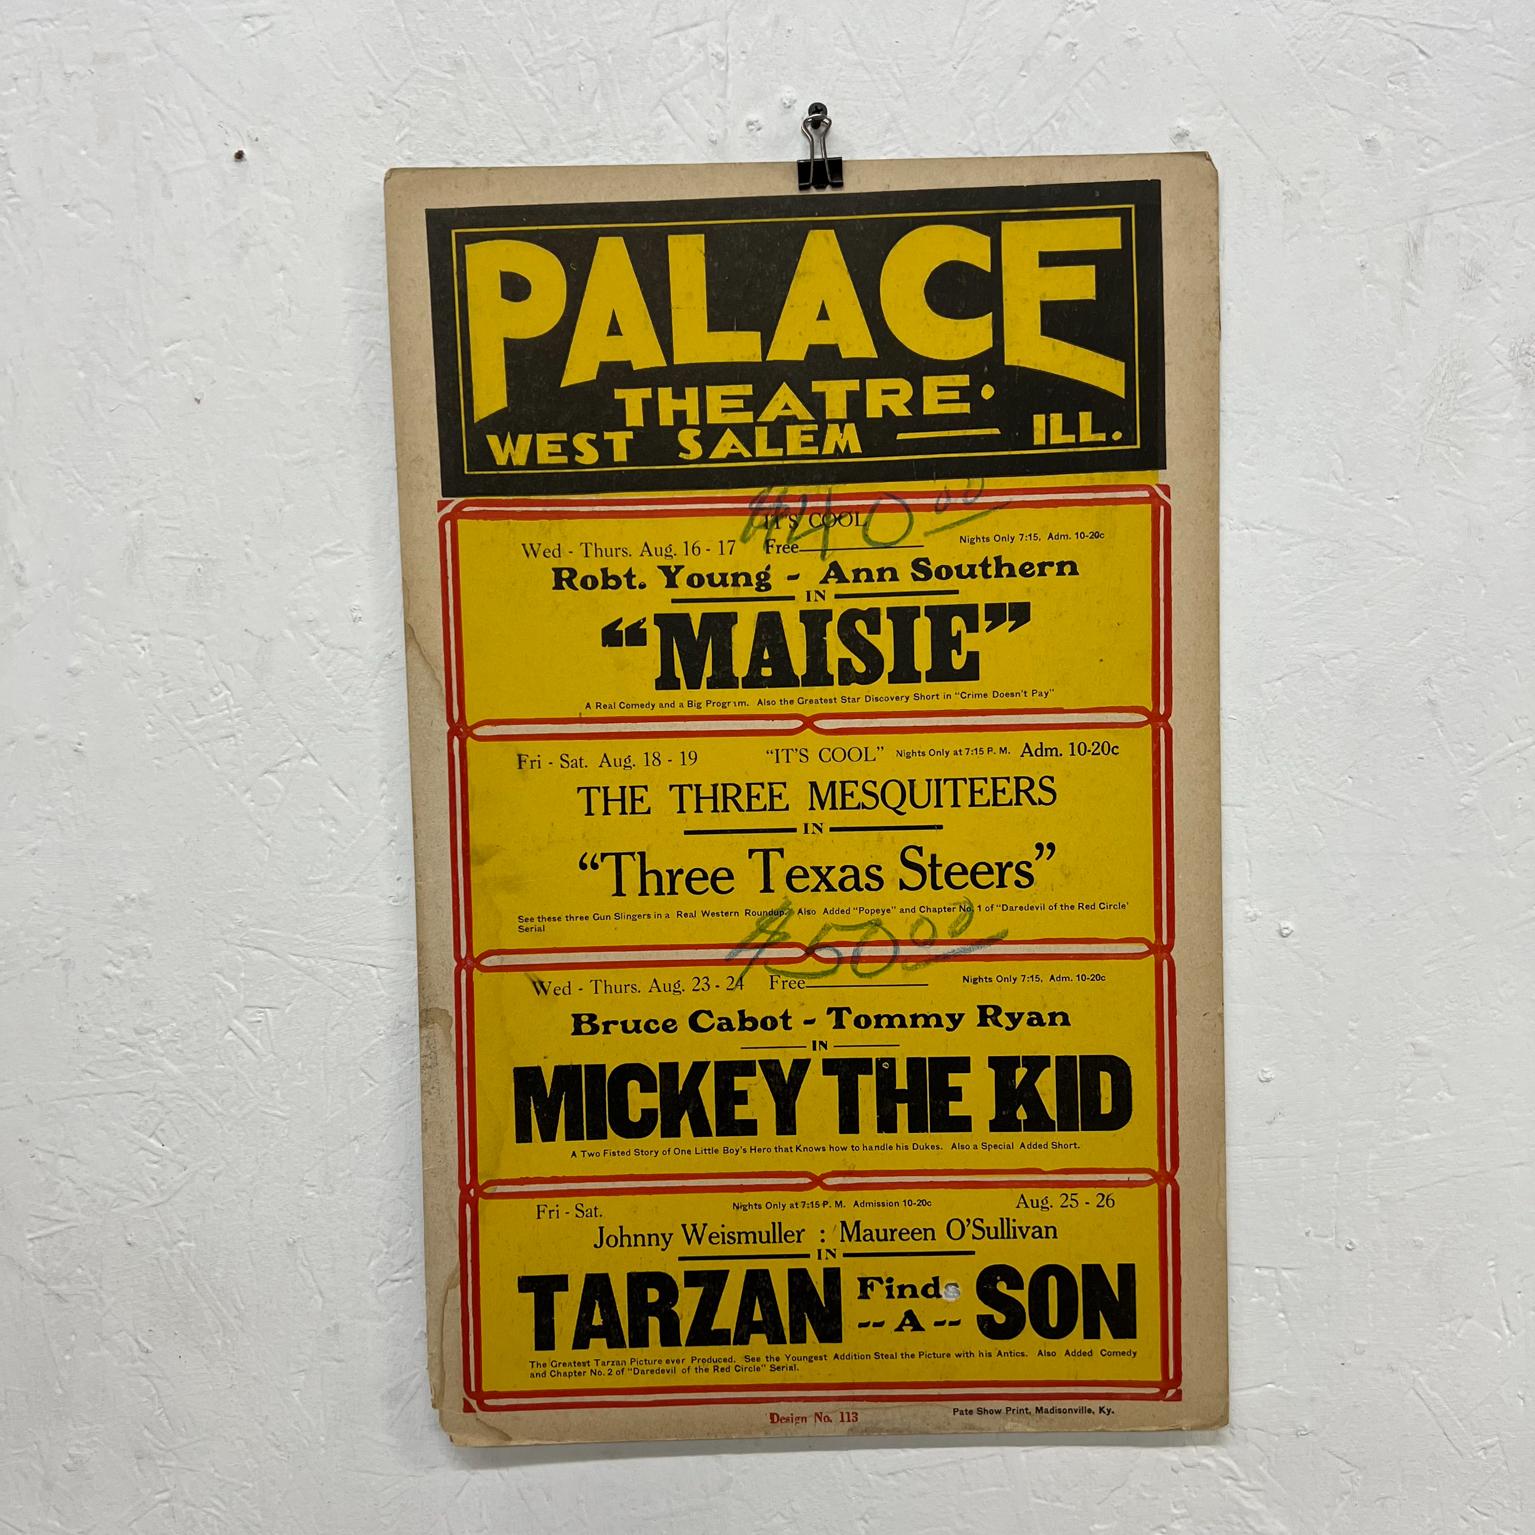 Old Palace Theatre Movie Poster Maisie Tarzan and more West Salem IL 
Admission 10 cents!
14 x 22
Preowned frayed unrestored vintage condition
See images please.